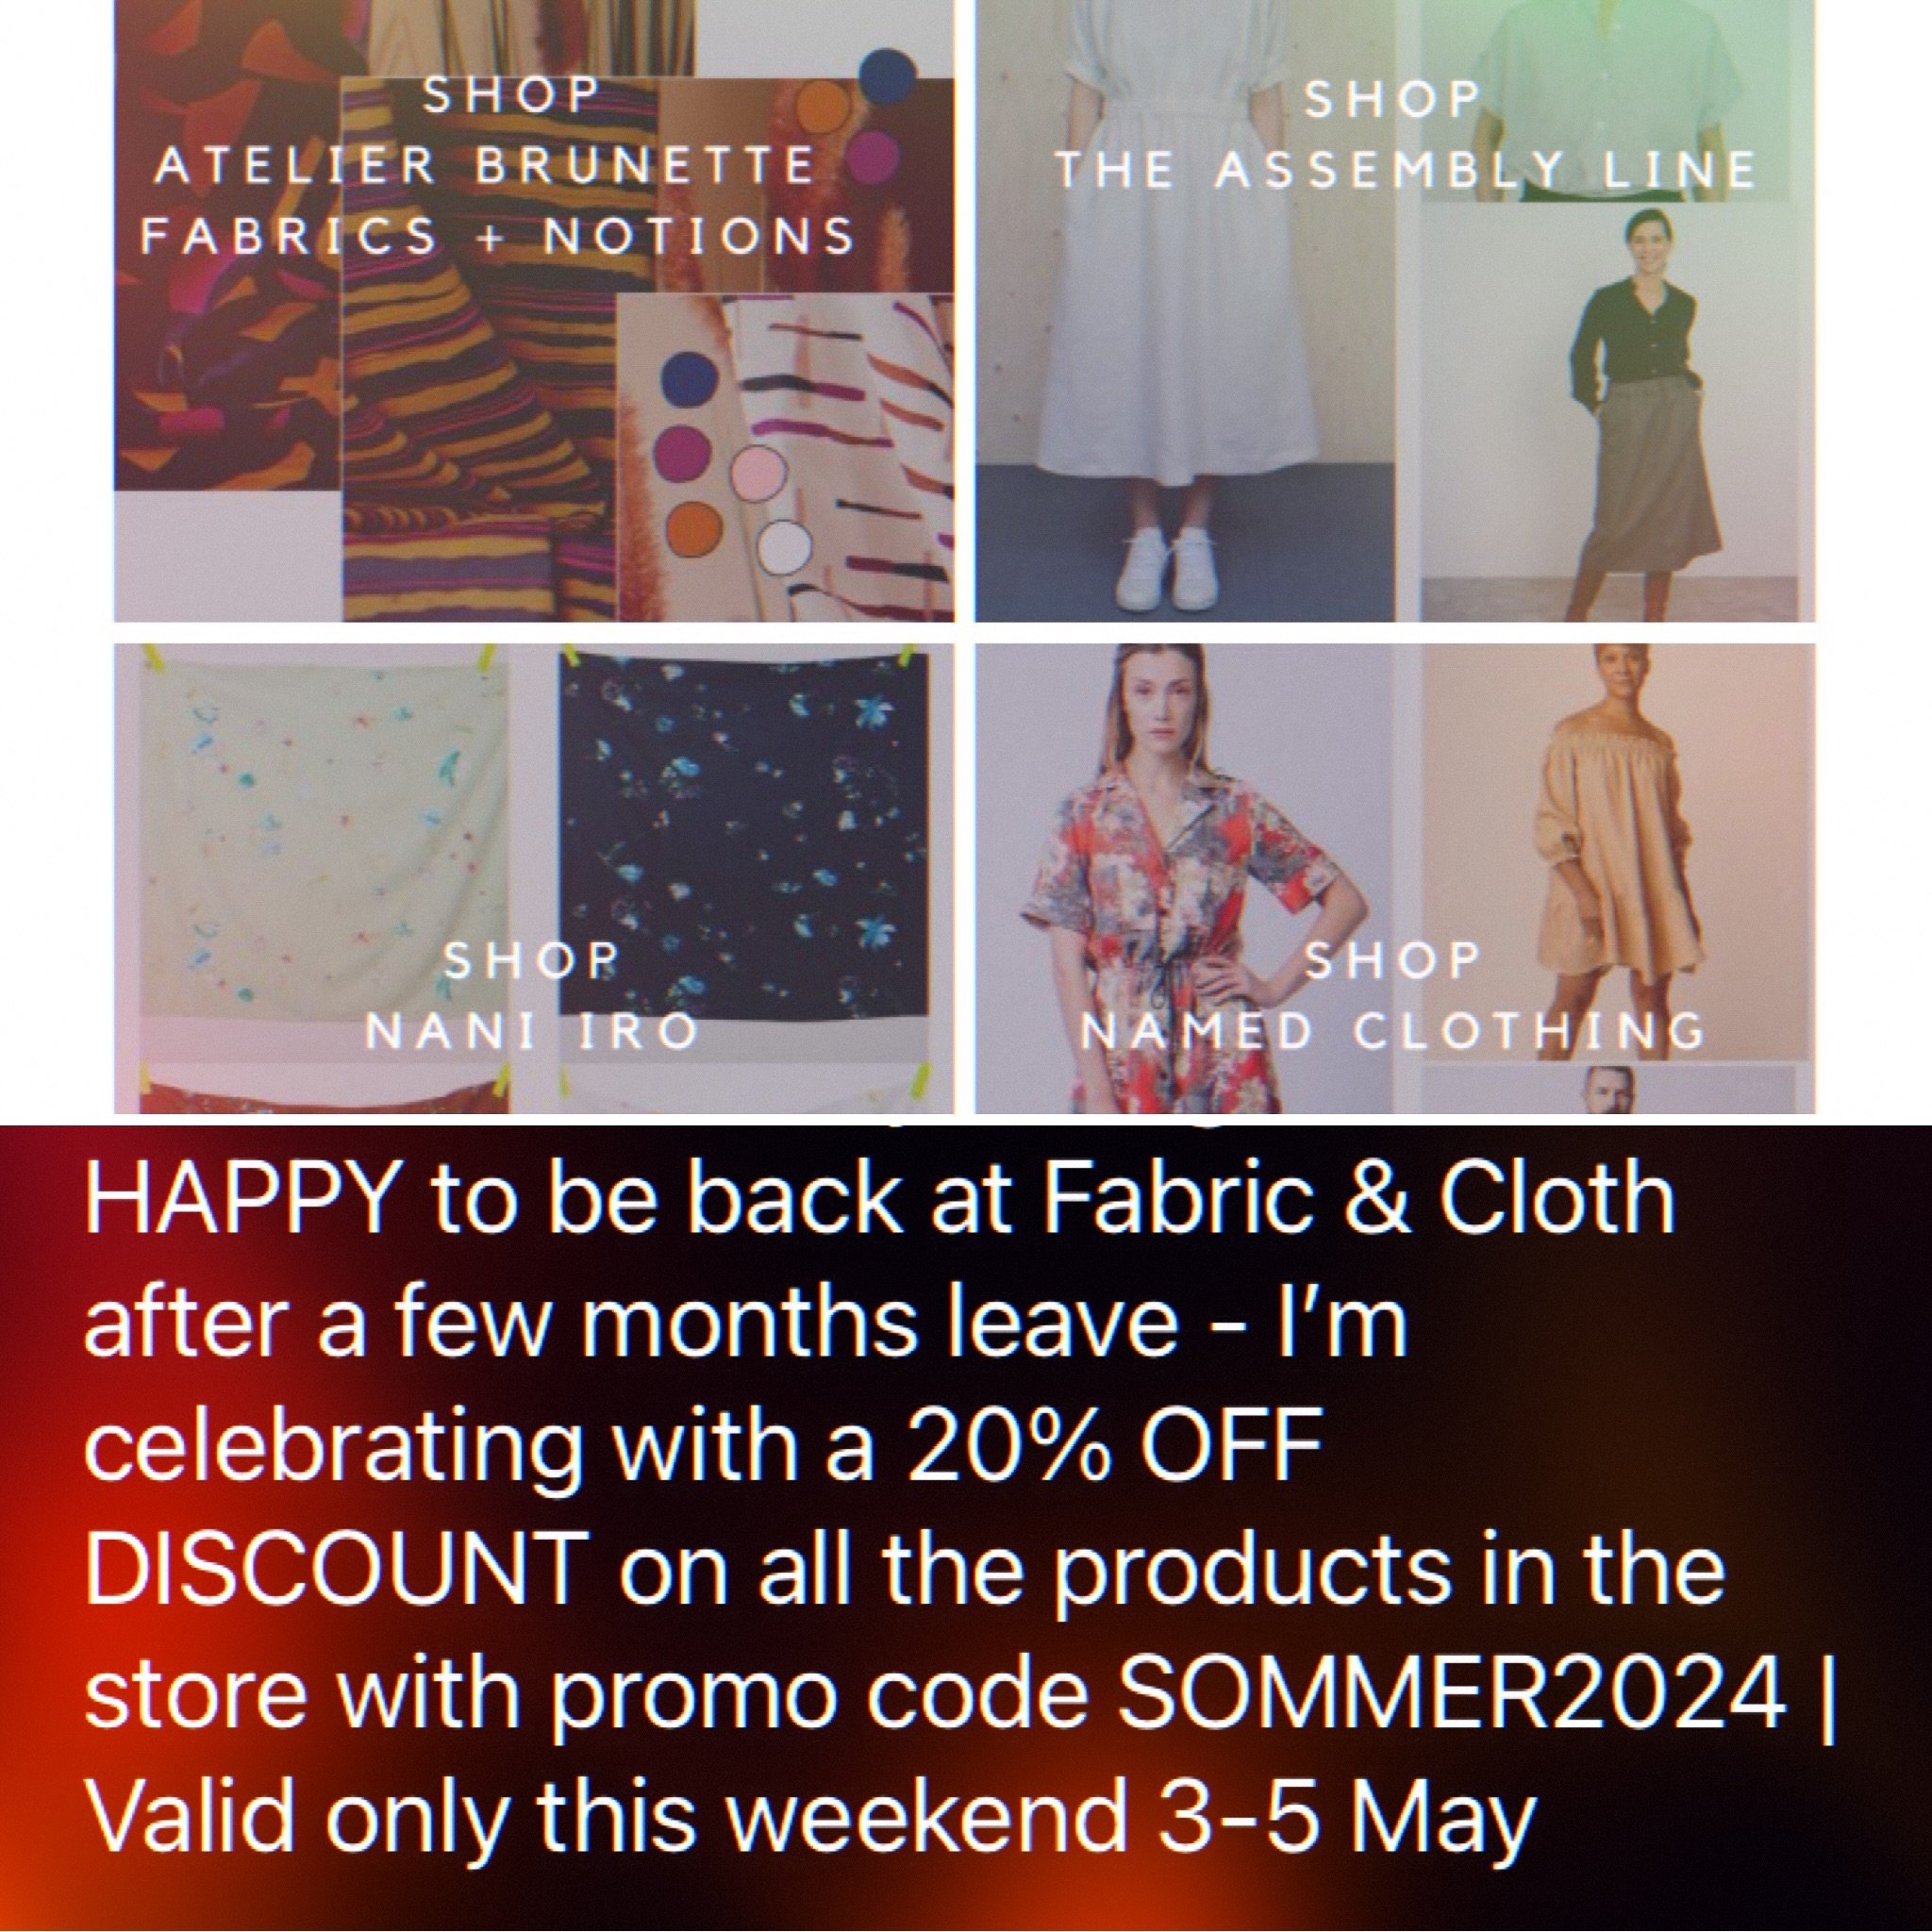 I&rsquo;m HAPPY to be back at Fabric &amp; Cloth after a few months leave - I&rsquo;m celebrating with a 20% OFF DISCOUNT on all the products in the store with promo code SOMMER2024 | Valid only this weekend 3-5 May

#fabricandclothcopenhagen #sysysy